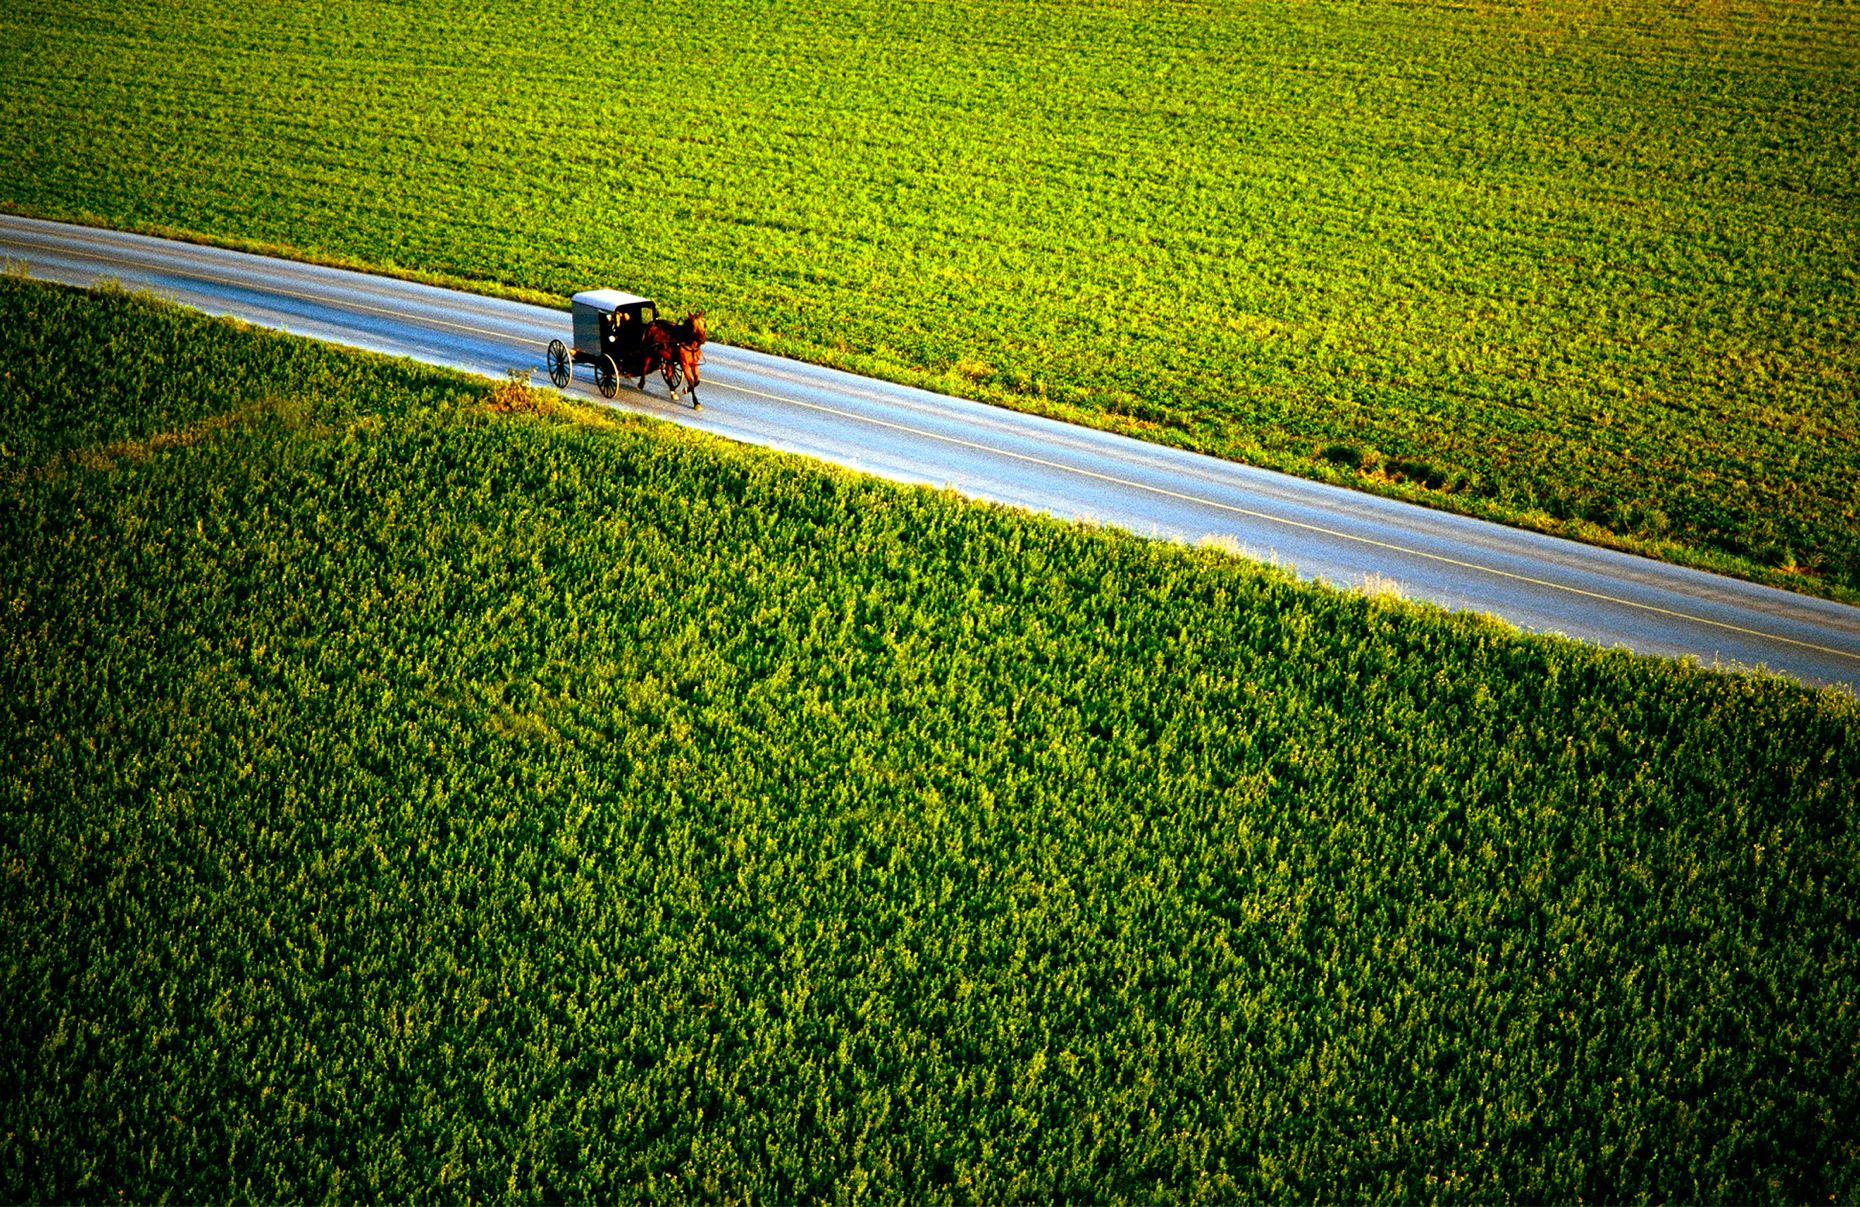 Low altitude aerial view of Amish horse & buggy on rural country road surrounded by corn fields